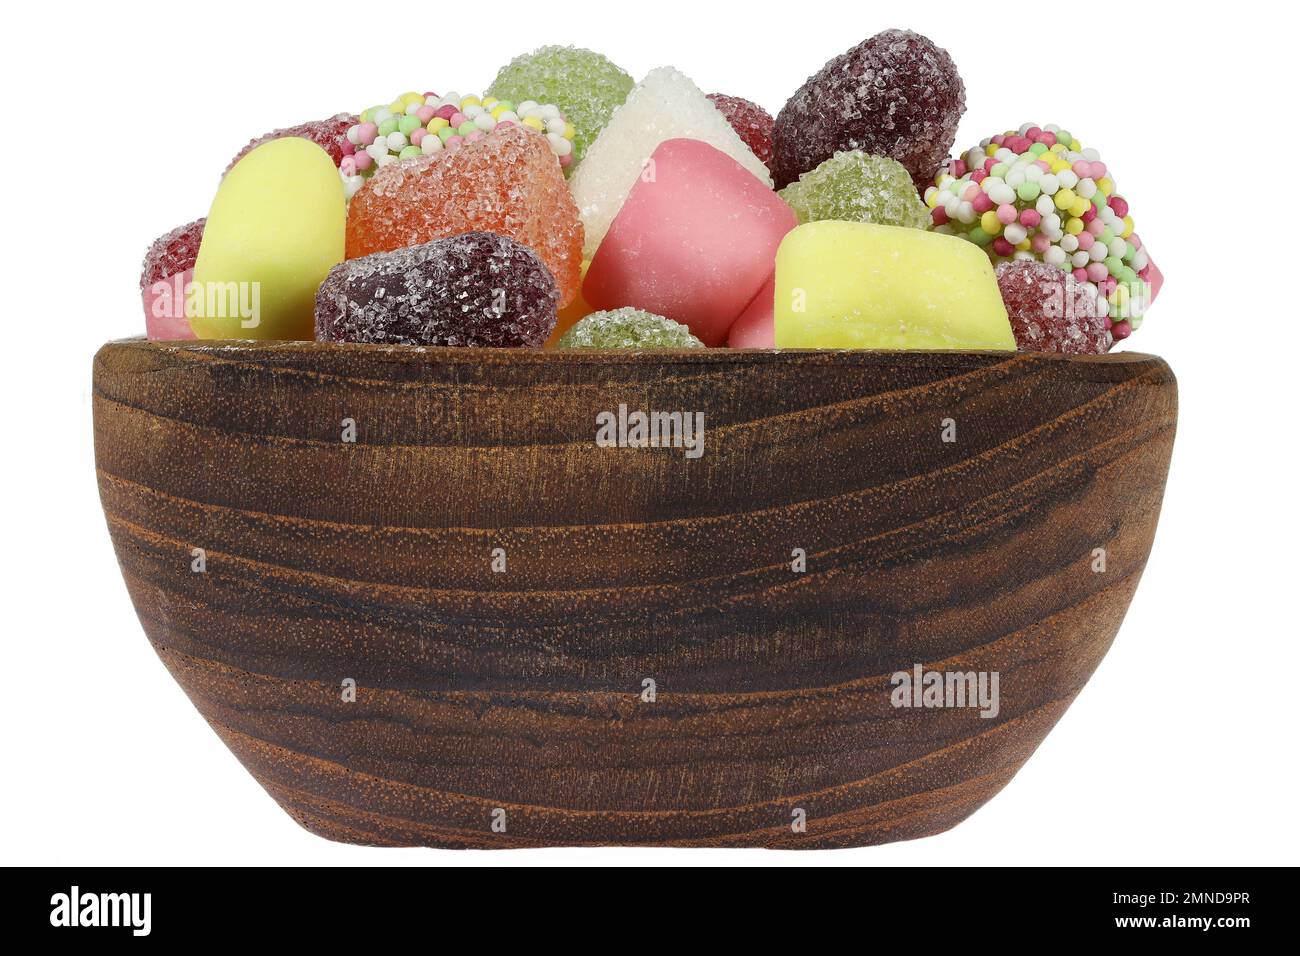 Dutch tum tum candies in a teakwood bowl isolated on white background Stock Photo